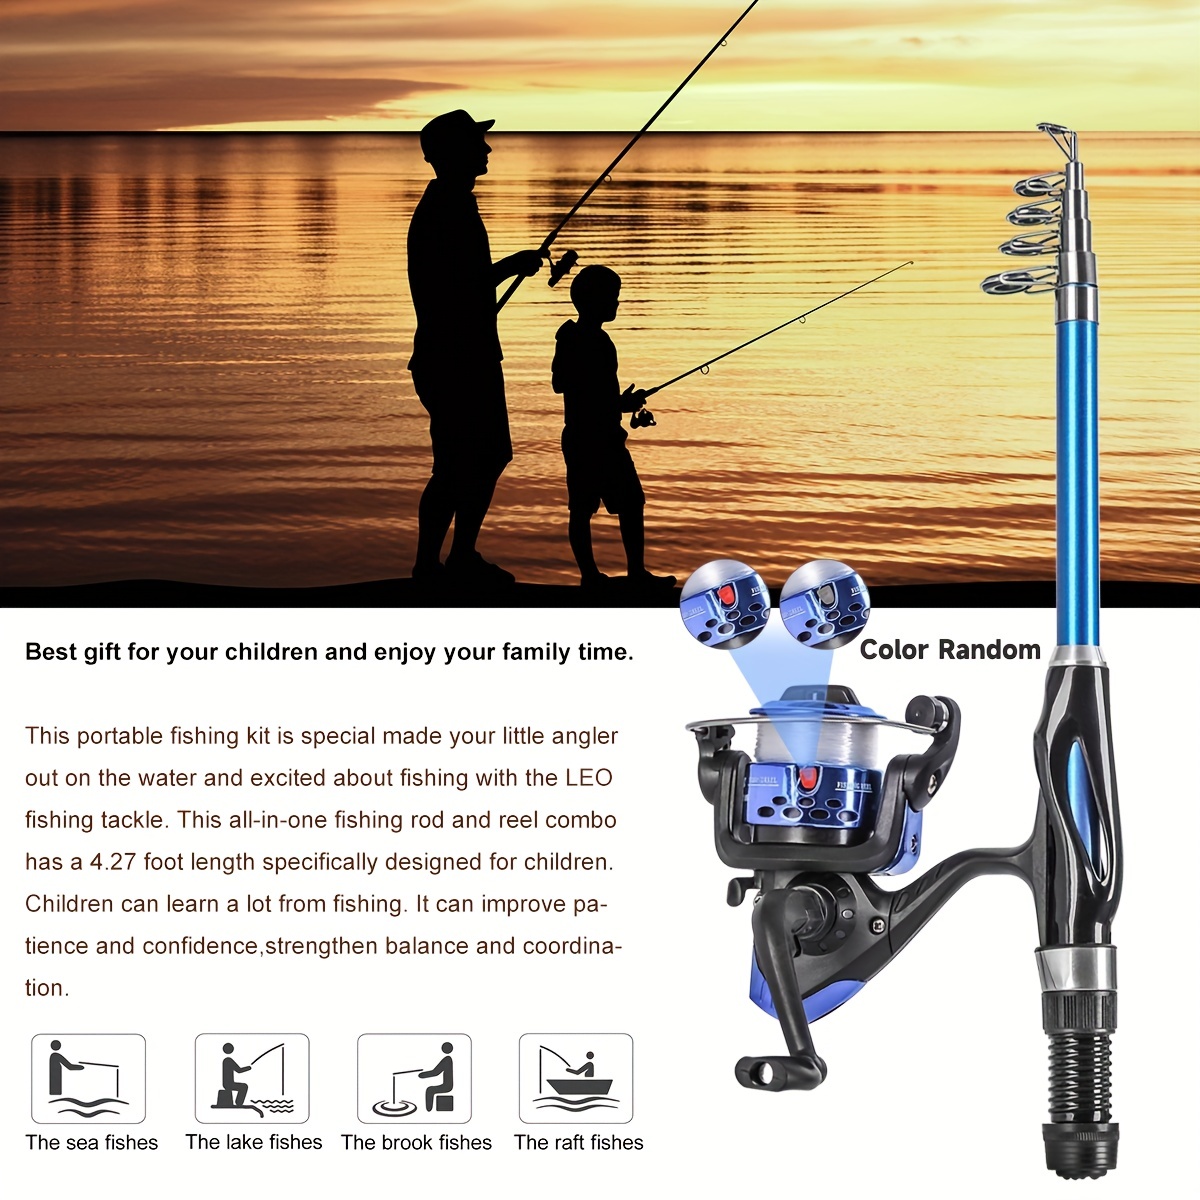 PLUSINNO Kids Fishing Pole with Spincast Reel Telescopic Fishing Rod Combo  Full Kits for Boys, Girls, and Adults